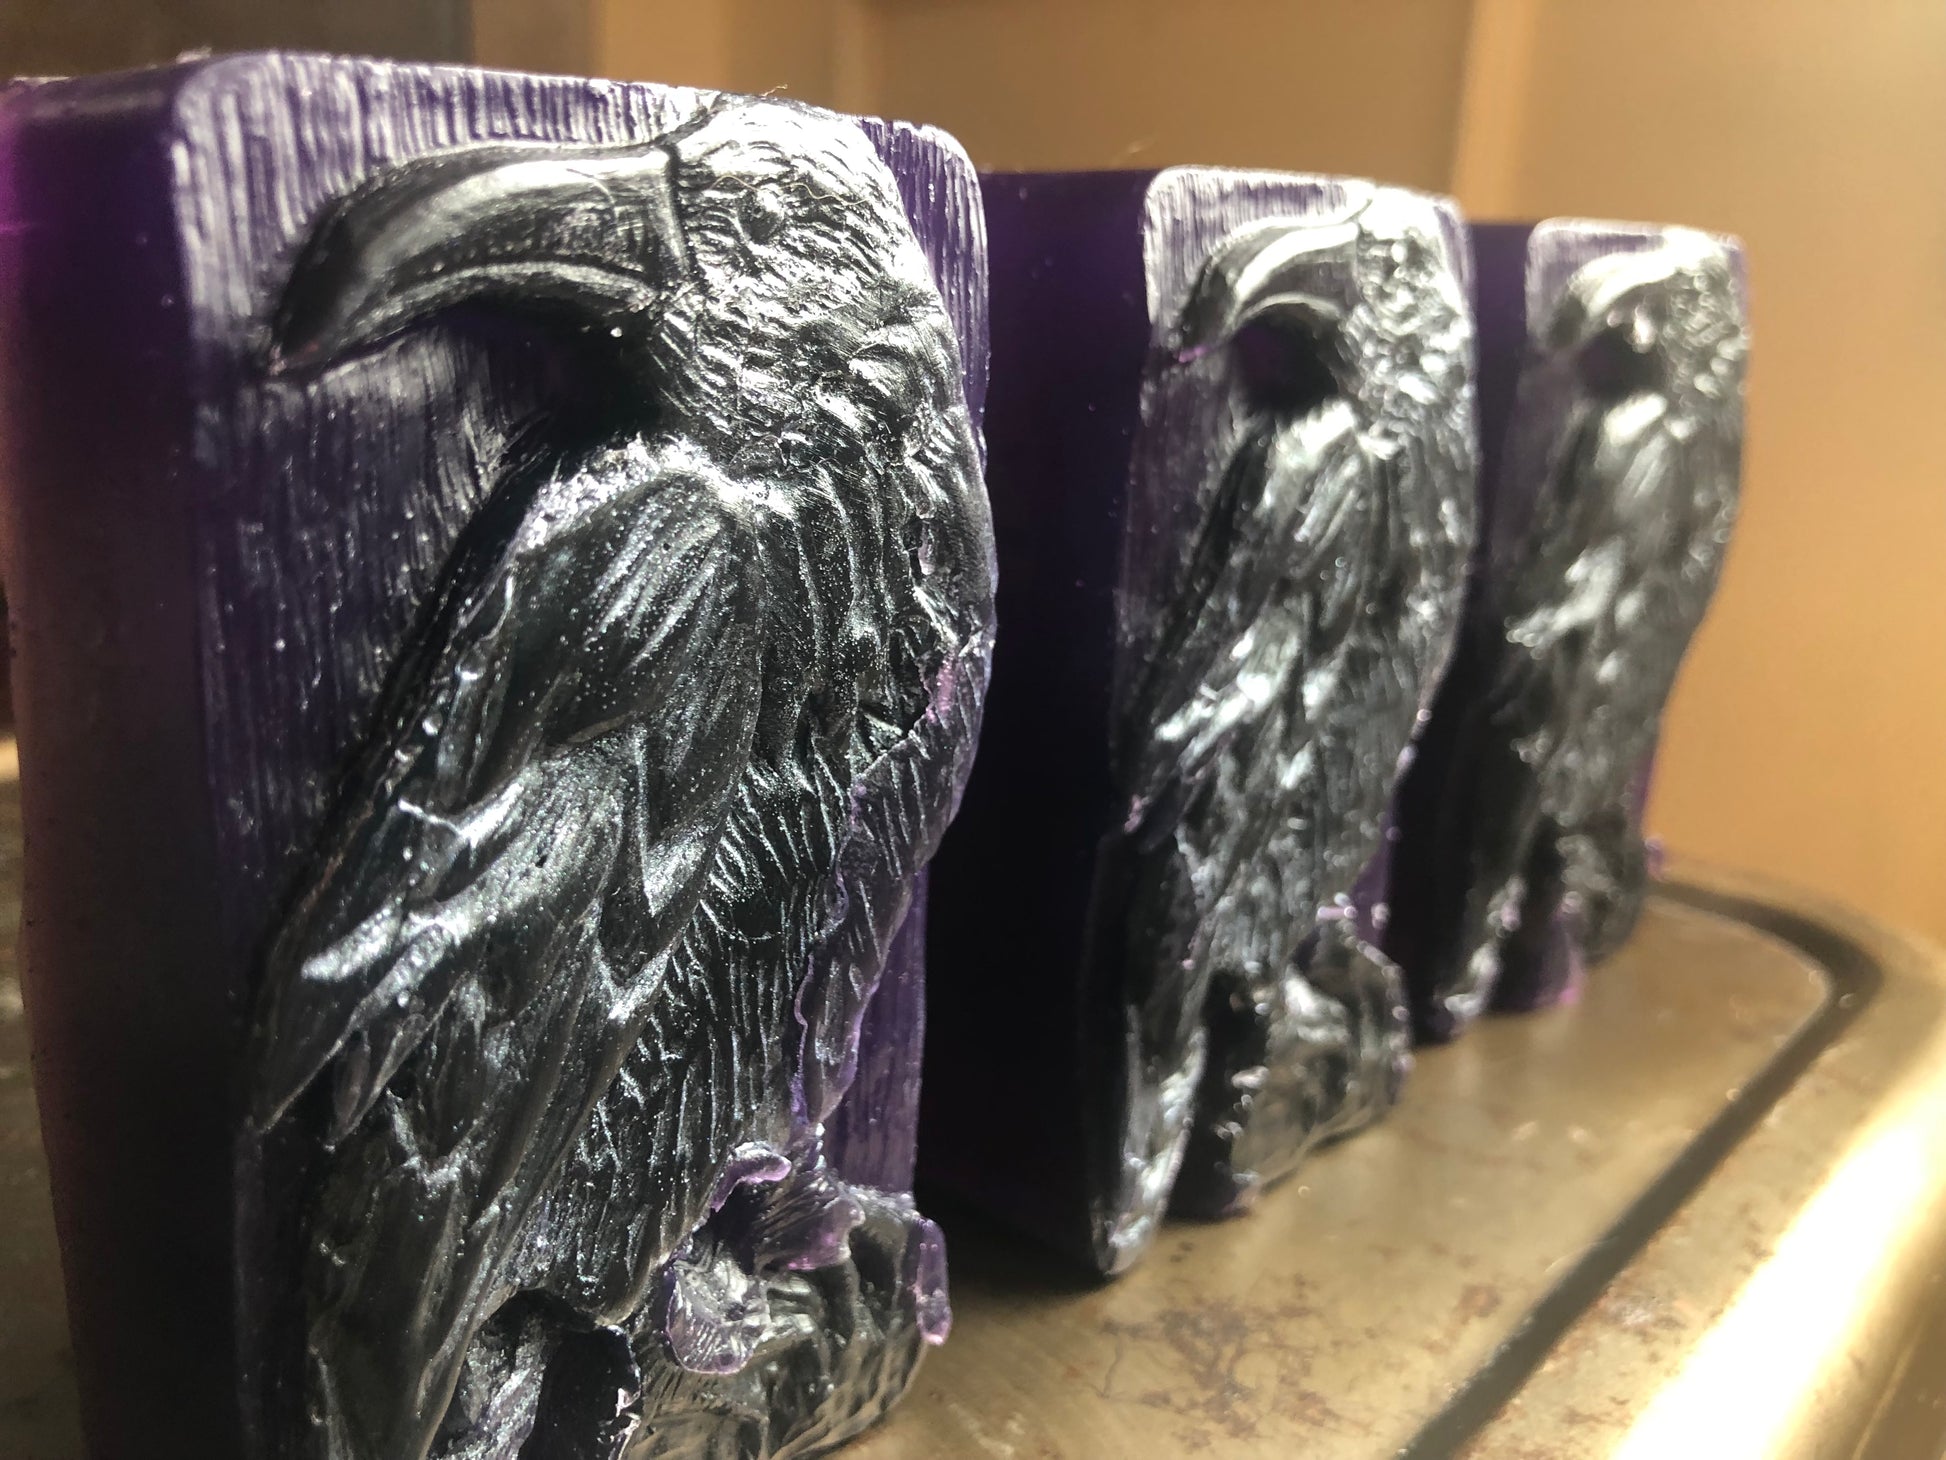 three bars of soap with ravens birds on a stool. bars are purple witih black raven bird in profile